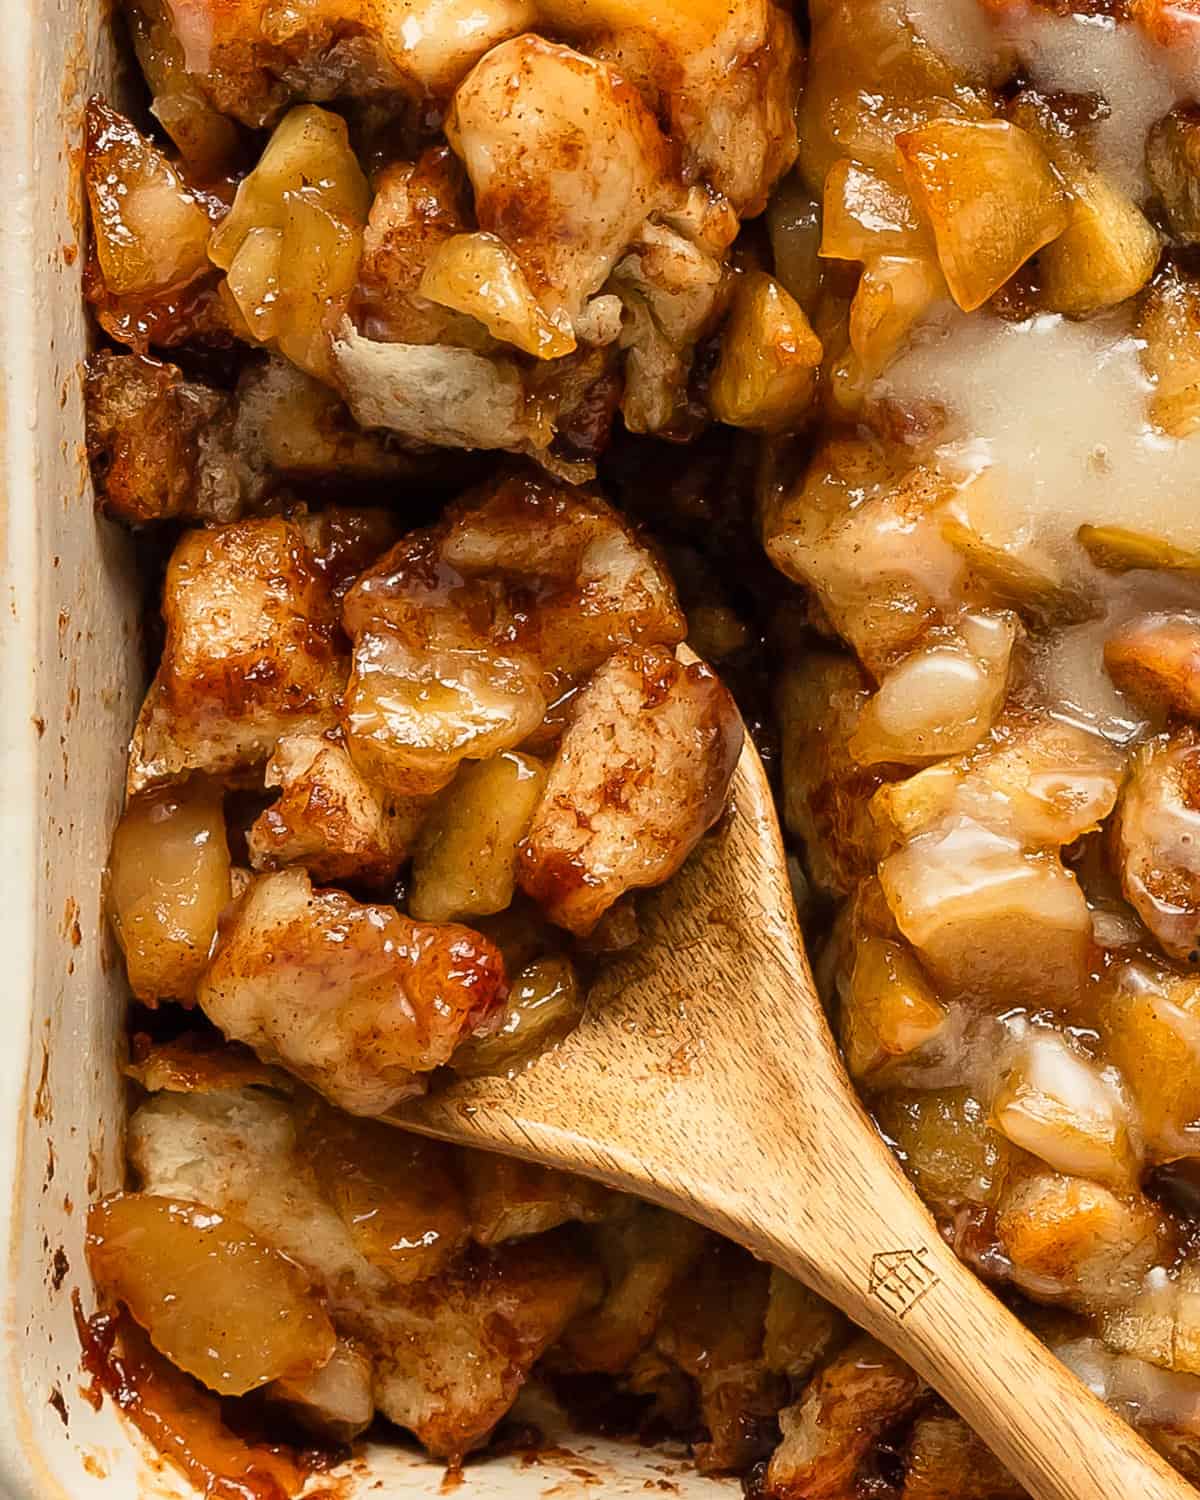 Cinnamon rolls and apple pie filling is an almost 2 ingredient cinnamon roll bake filled with warm apple pie sauce and chunks of sweet, gooey apples. This quick and easy apple pie cinnamon roll cobbler makes the perfect weekend treat or a special holiday breakfast or dessert. 